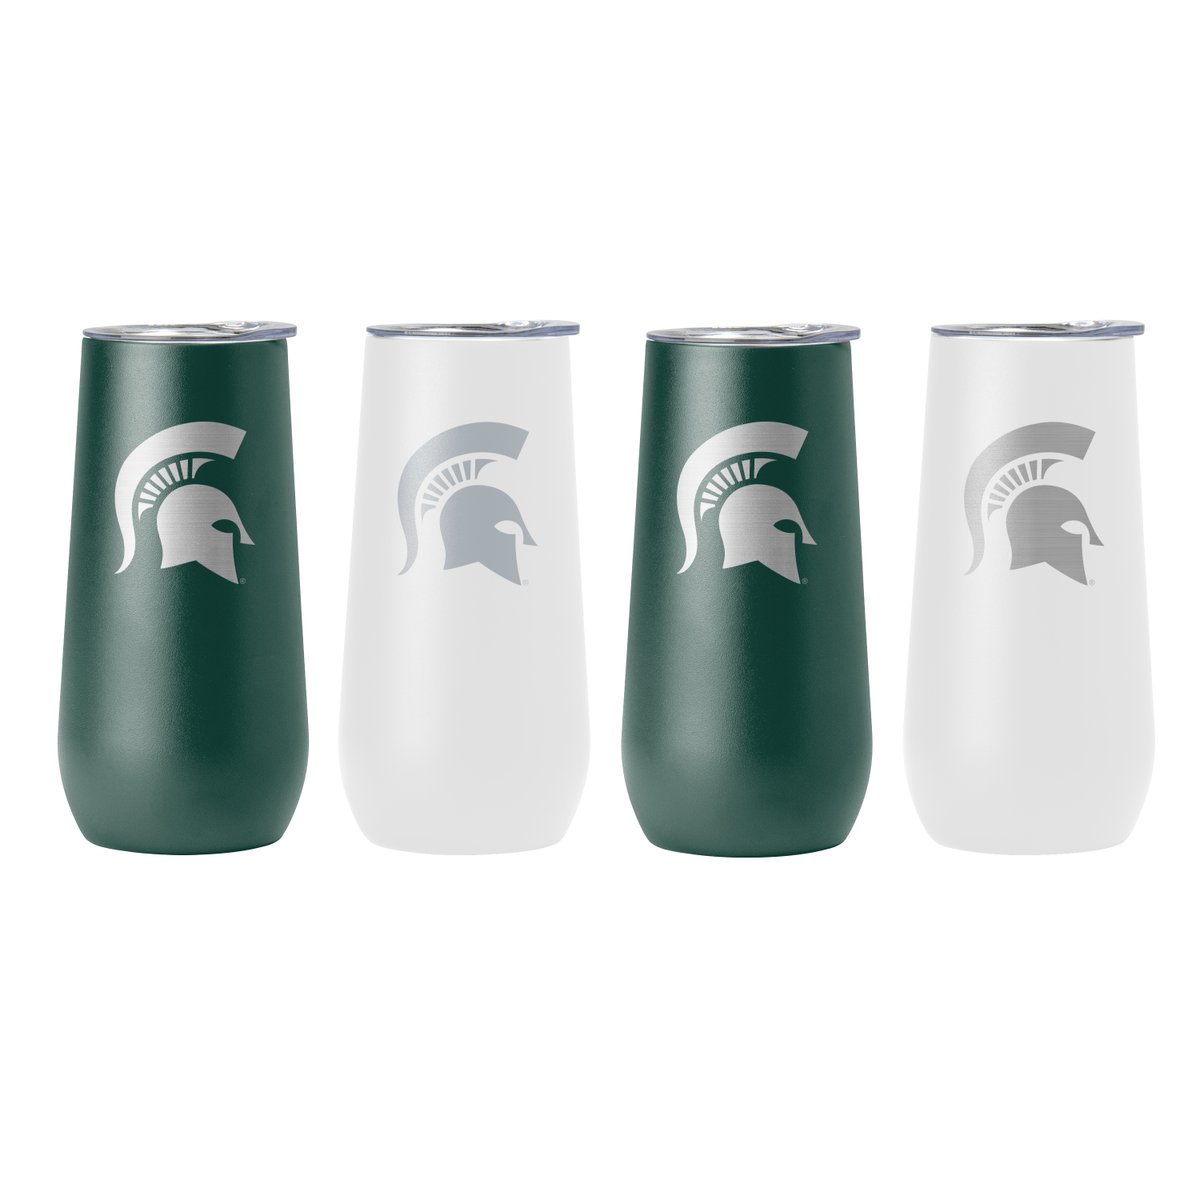 Don't forget Mom tomorrow! If you're still looking for a great gift for your Spartan Mom, check out these @logobrandsinc 4-pack of MSU 10oz stainless steel insulated tumblers with lids, available at both Lansing @SamsClub and online: samsclub.com/p/logo-brands-… #mothersday #gogreen